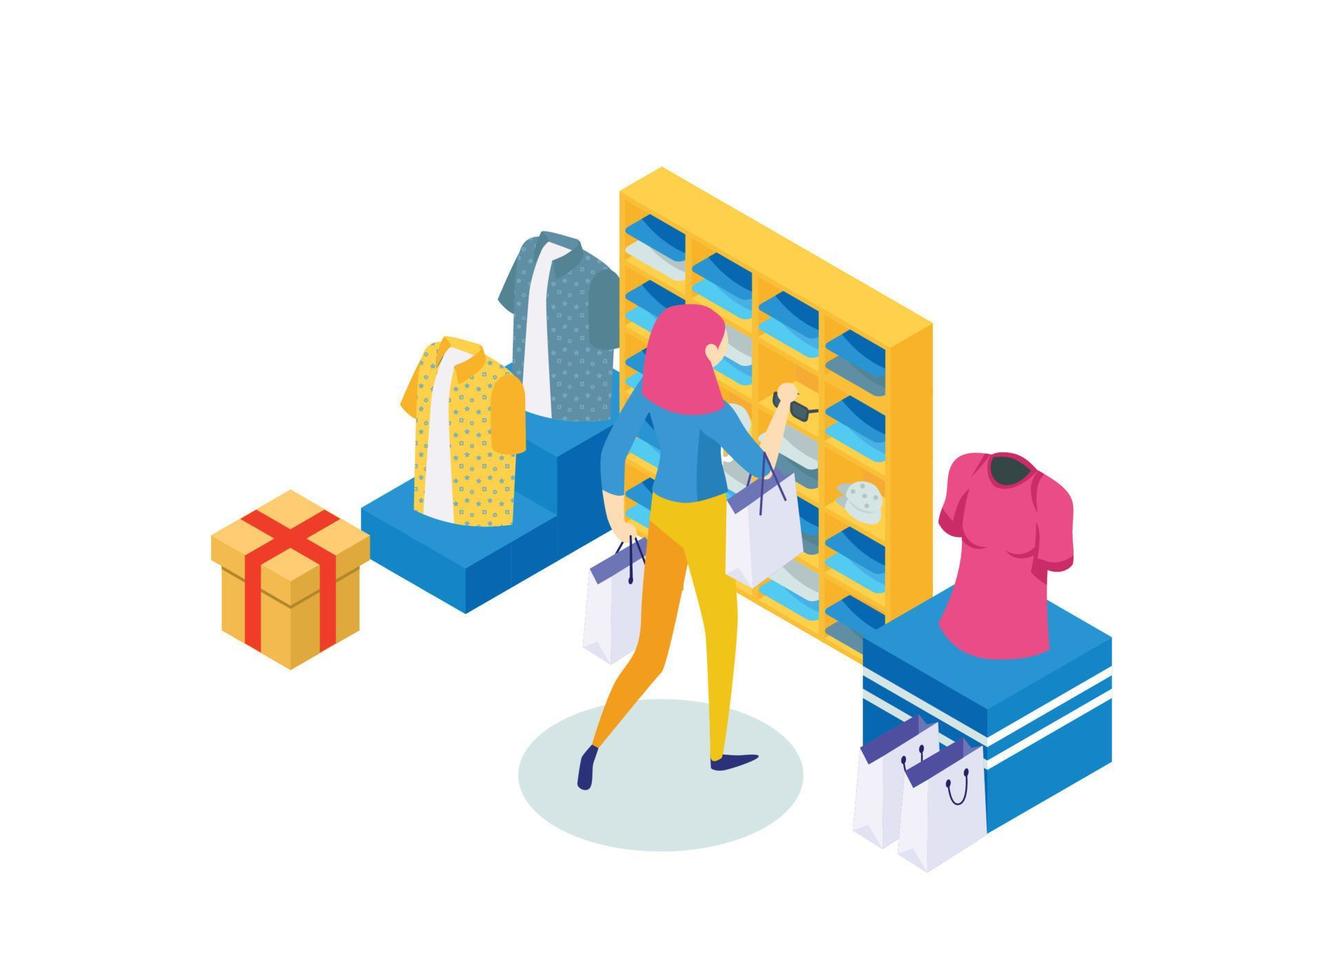 Isometric 3D illustration of shopping for clothes. Vector Illustration Suitable for Diagrams, Infographics and Other Graphical assets